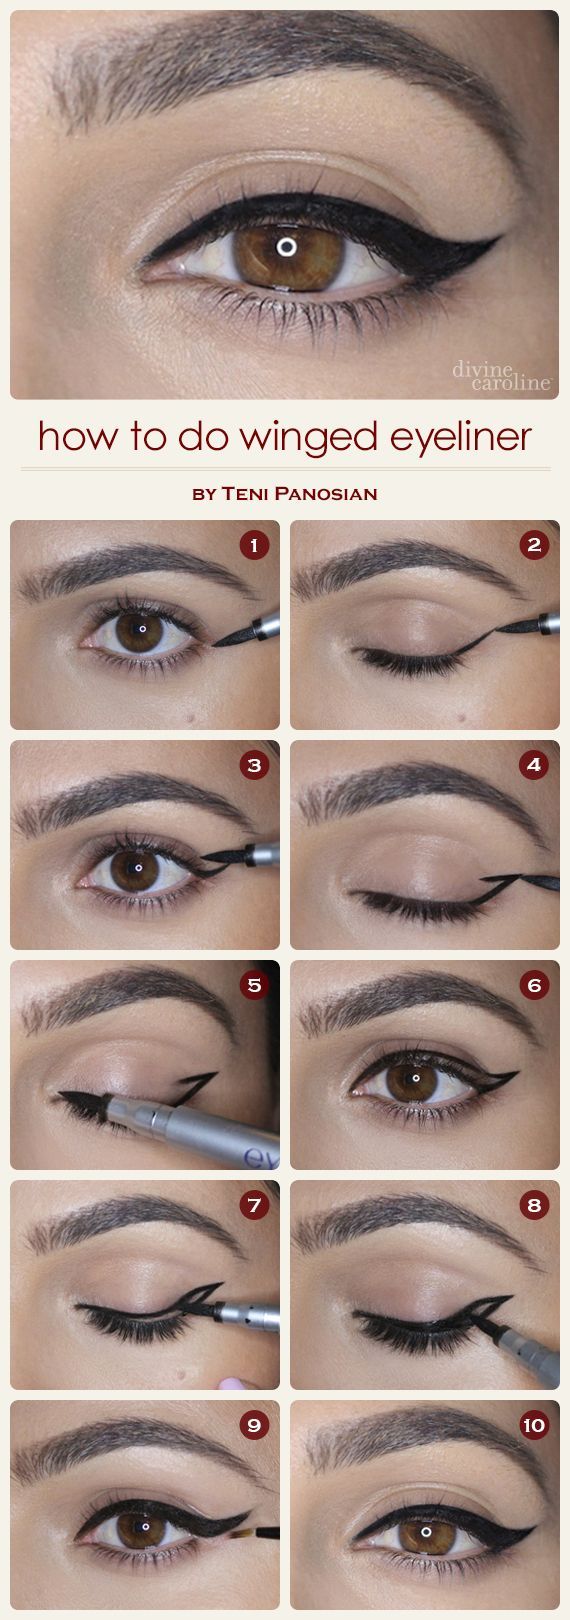 How to Do Winged Eyeliner | Easy Step By Step Tutorial on How to Achieve Perfect...